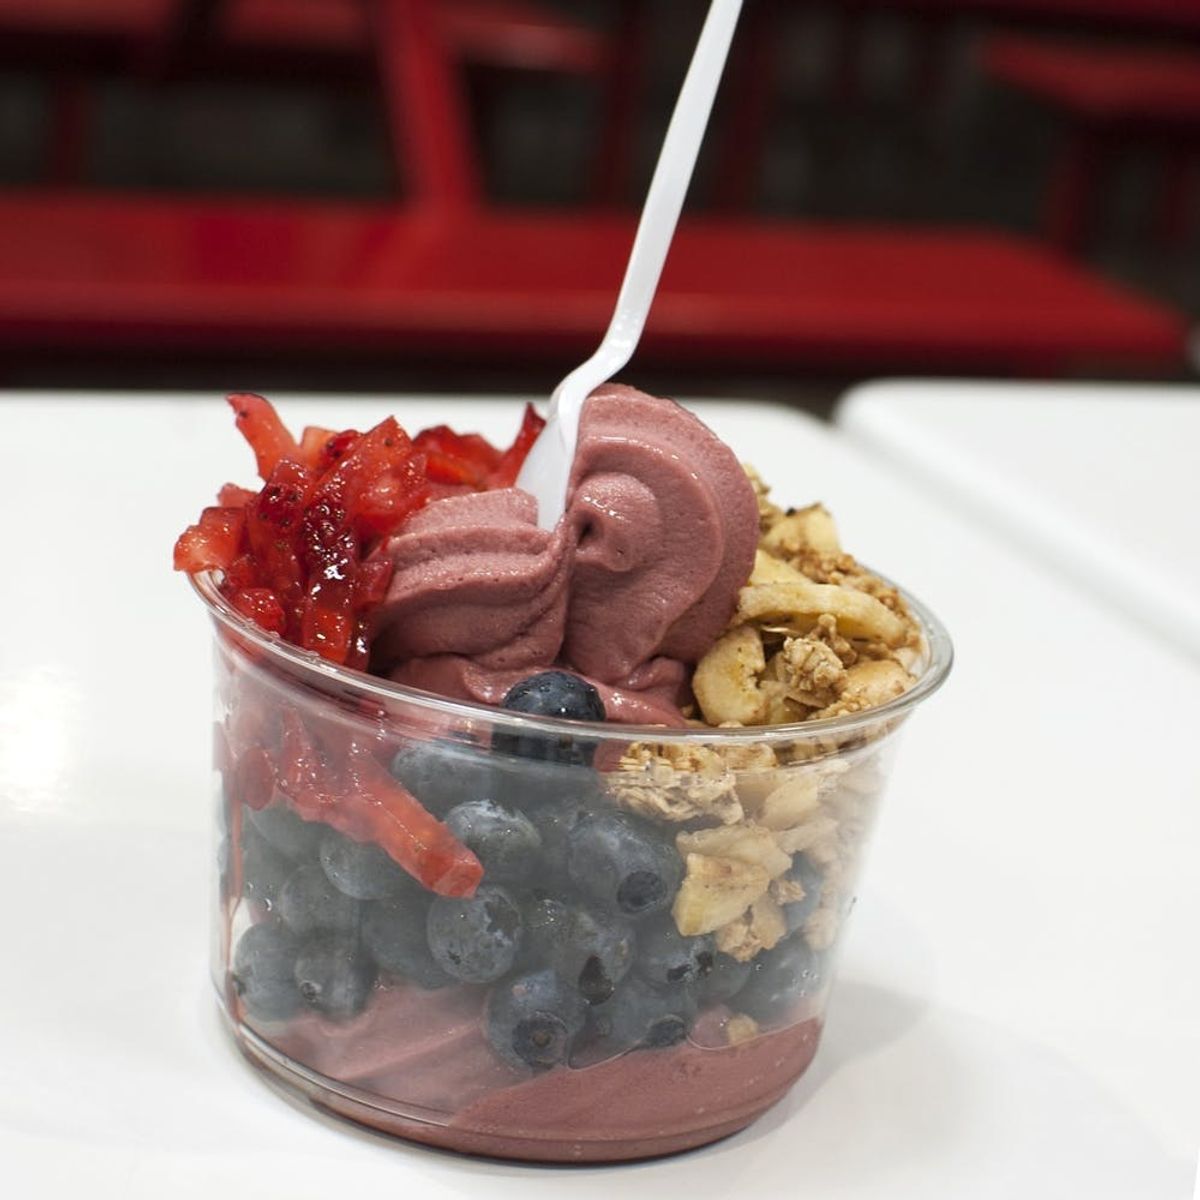 Costco Now Sells a $5 Acai Bowl… and It’s Dang GOOD